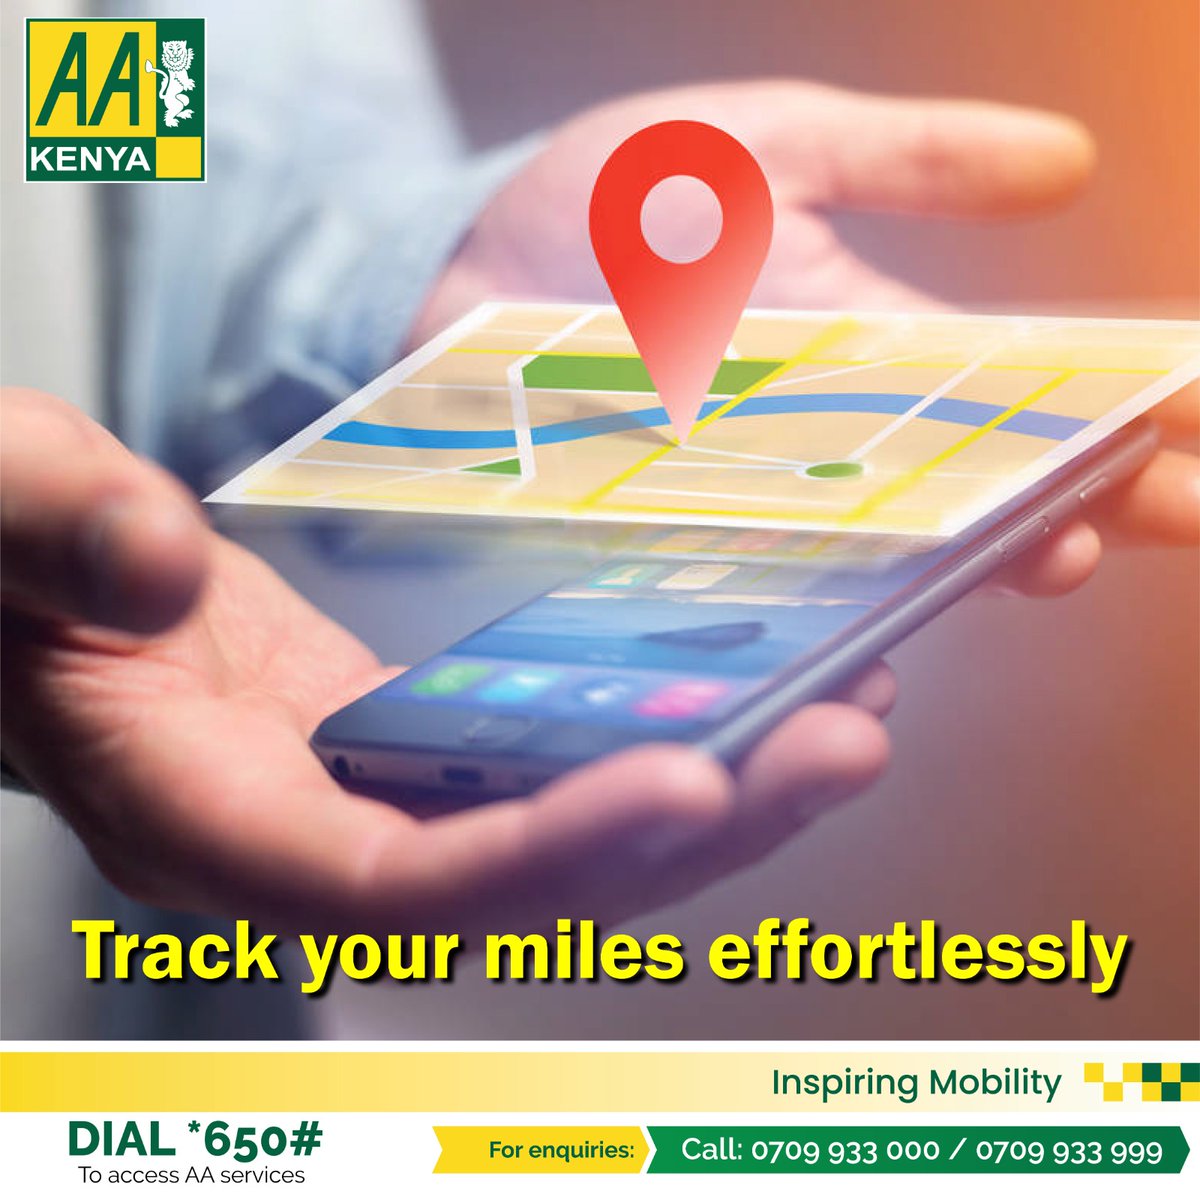 With only 100 bob, you can access the AA mileage rates online. Simply dial *650#, option 6, and follow the prompts or visit our website bit.ly/3uEvBg7 to access.
#AAKenyacares #InspiringMobility